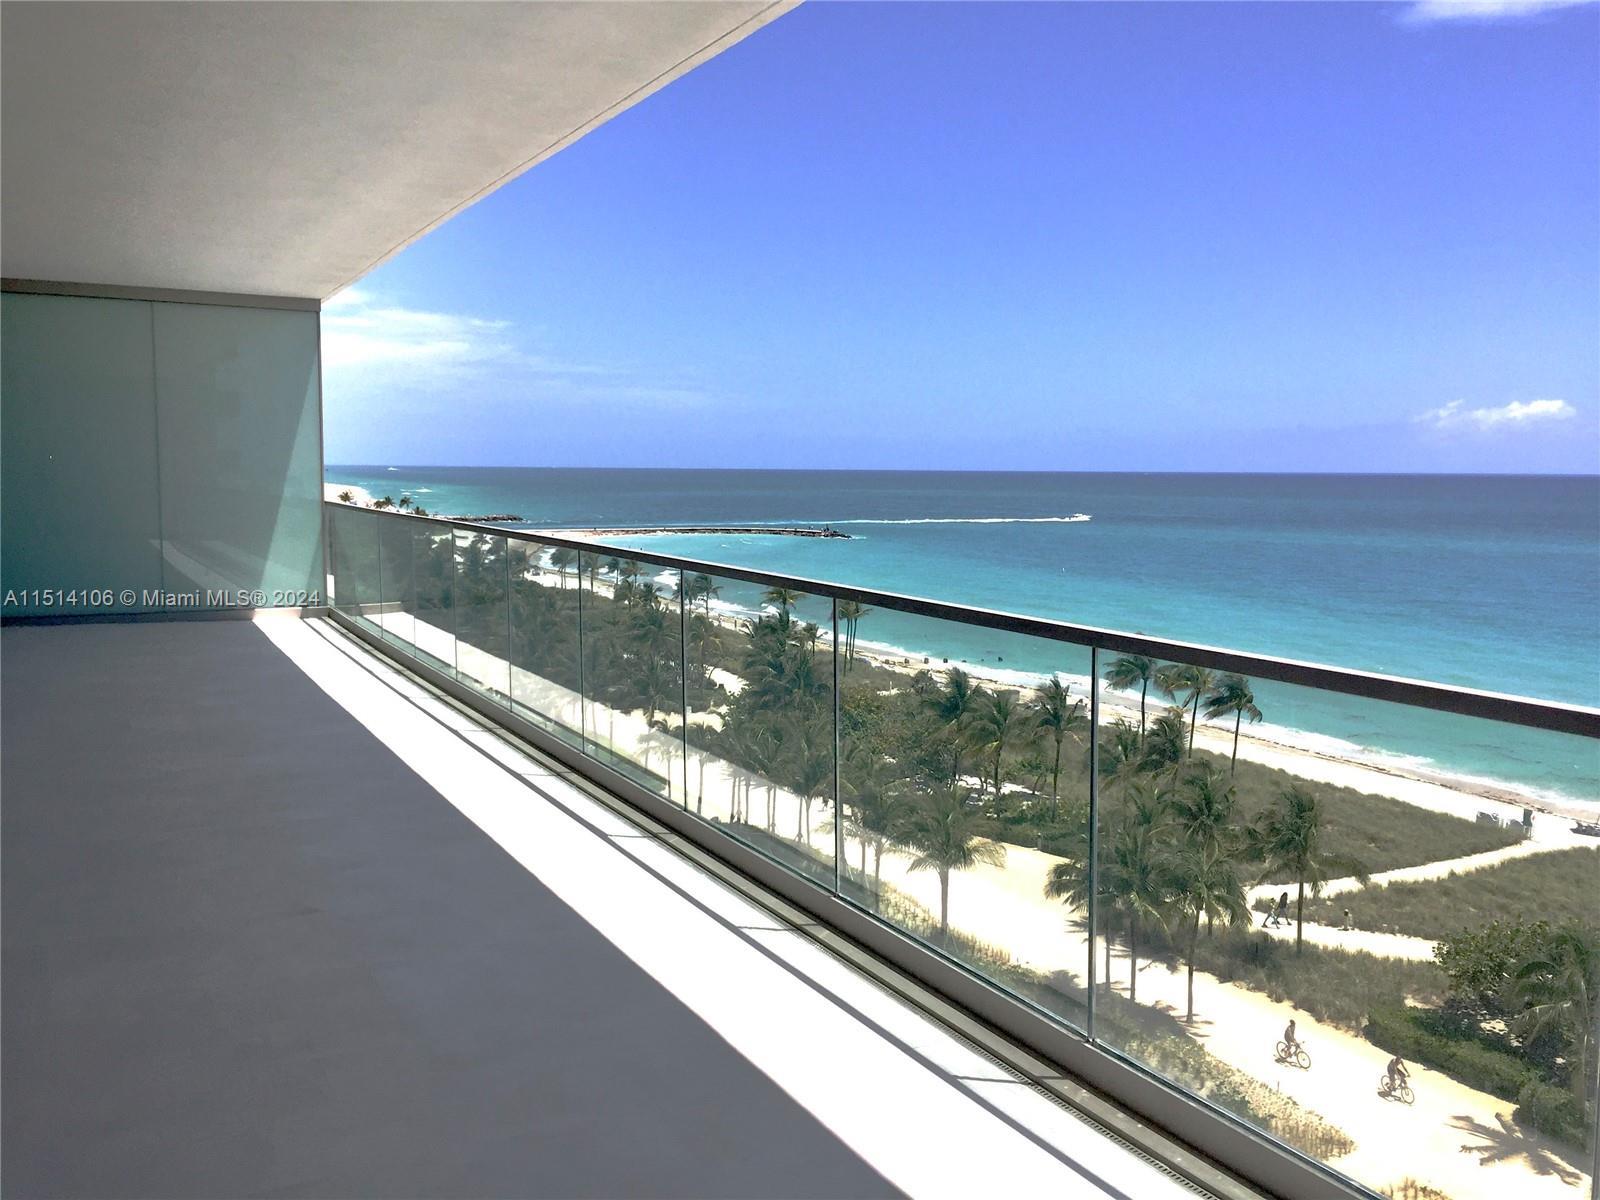 Step into luxury with this impeccable residence, situated in the renowned Bal Harbour's tallest buil